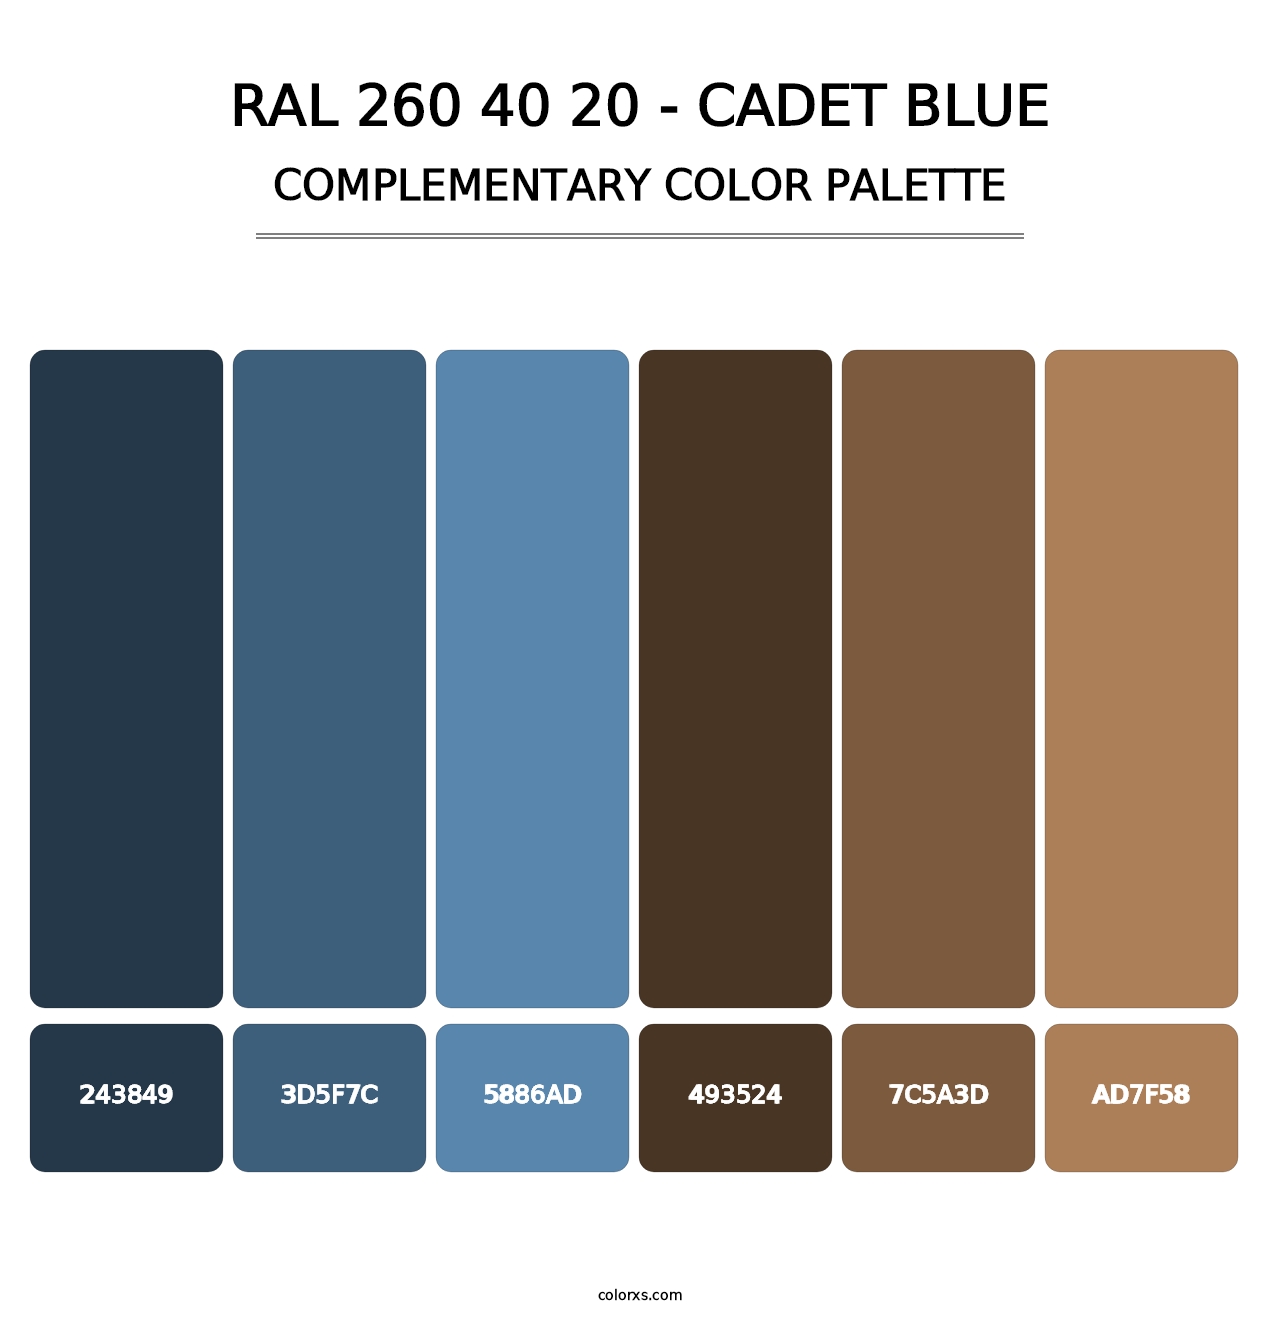 RAL 260 40 20 - Cadet Blue - Complementary Color Palette